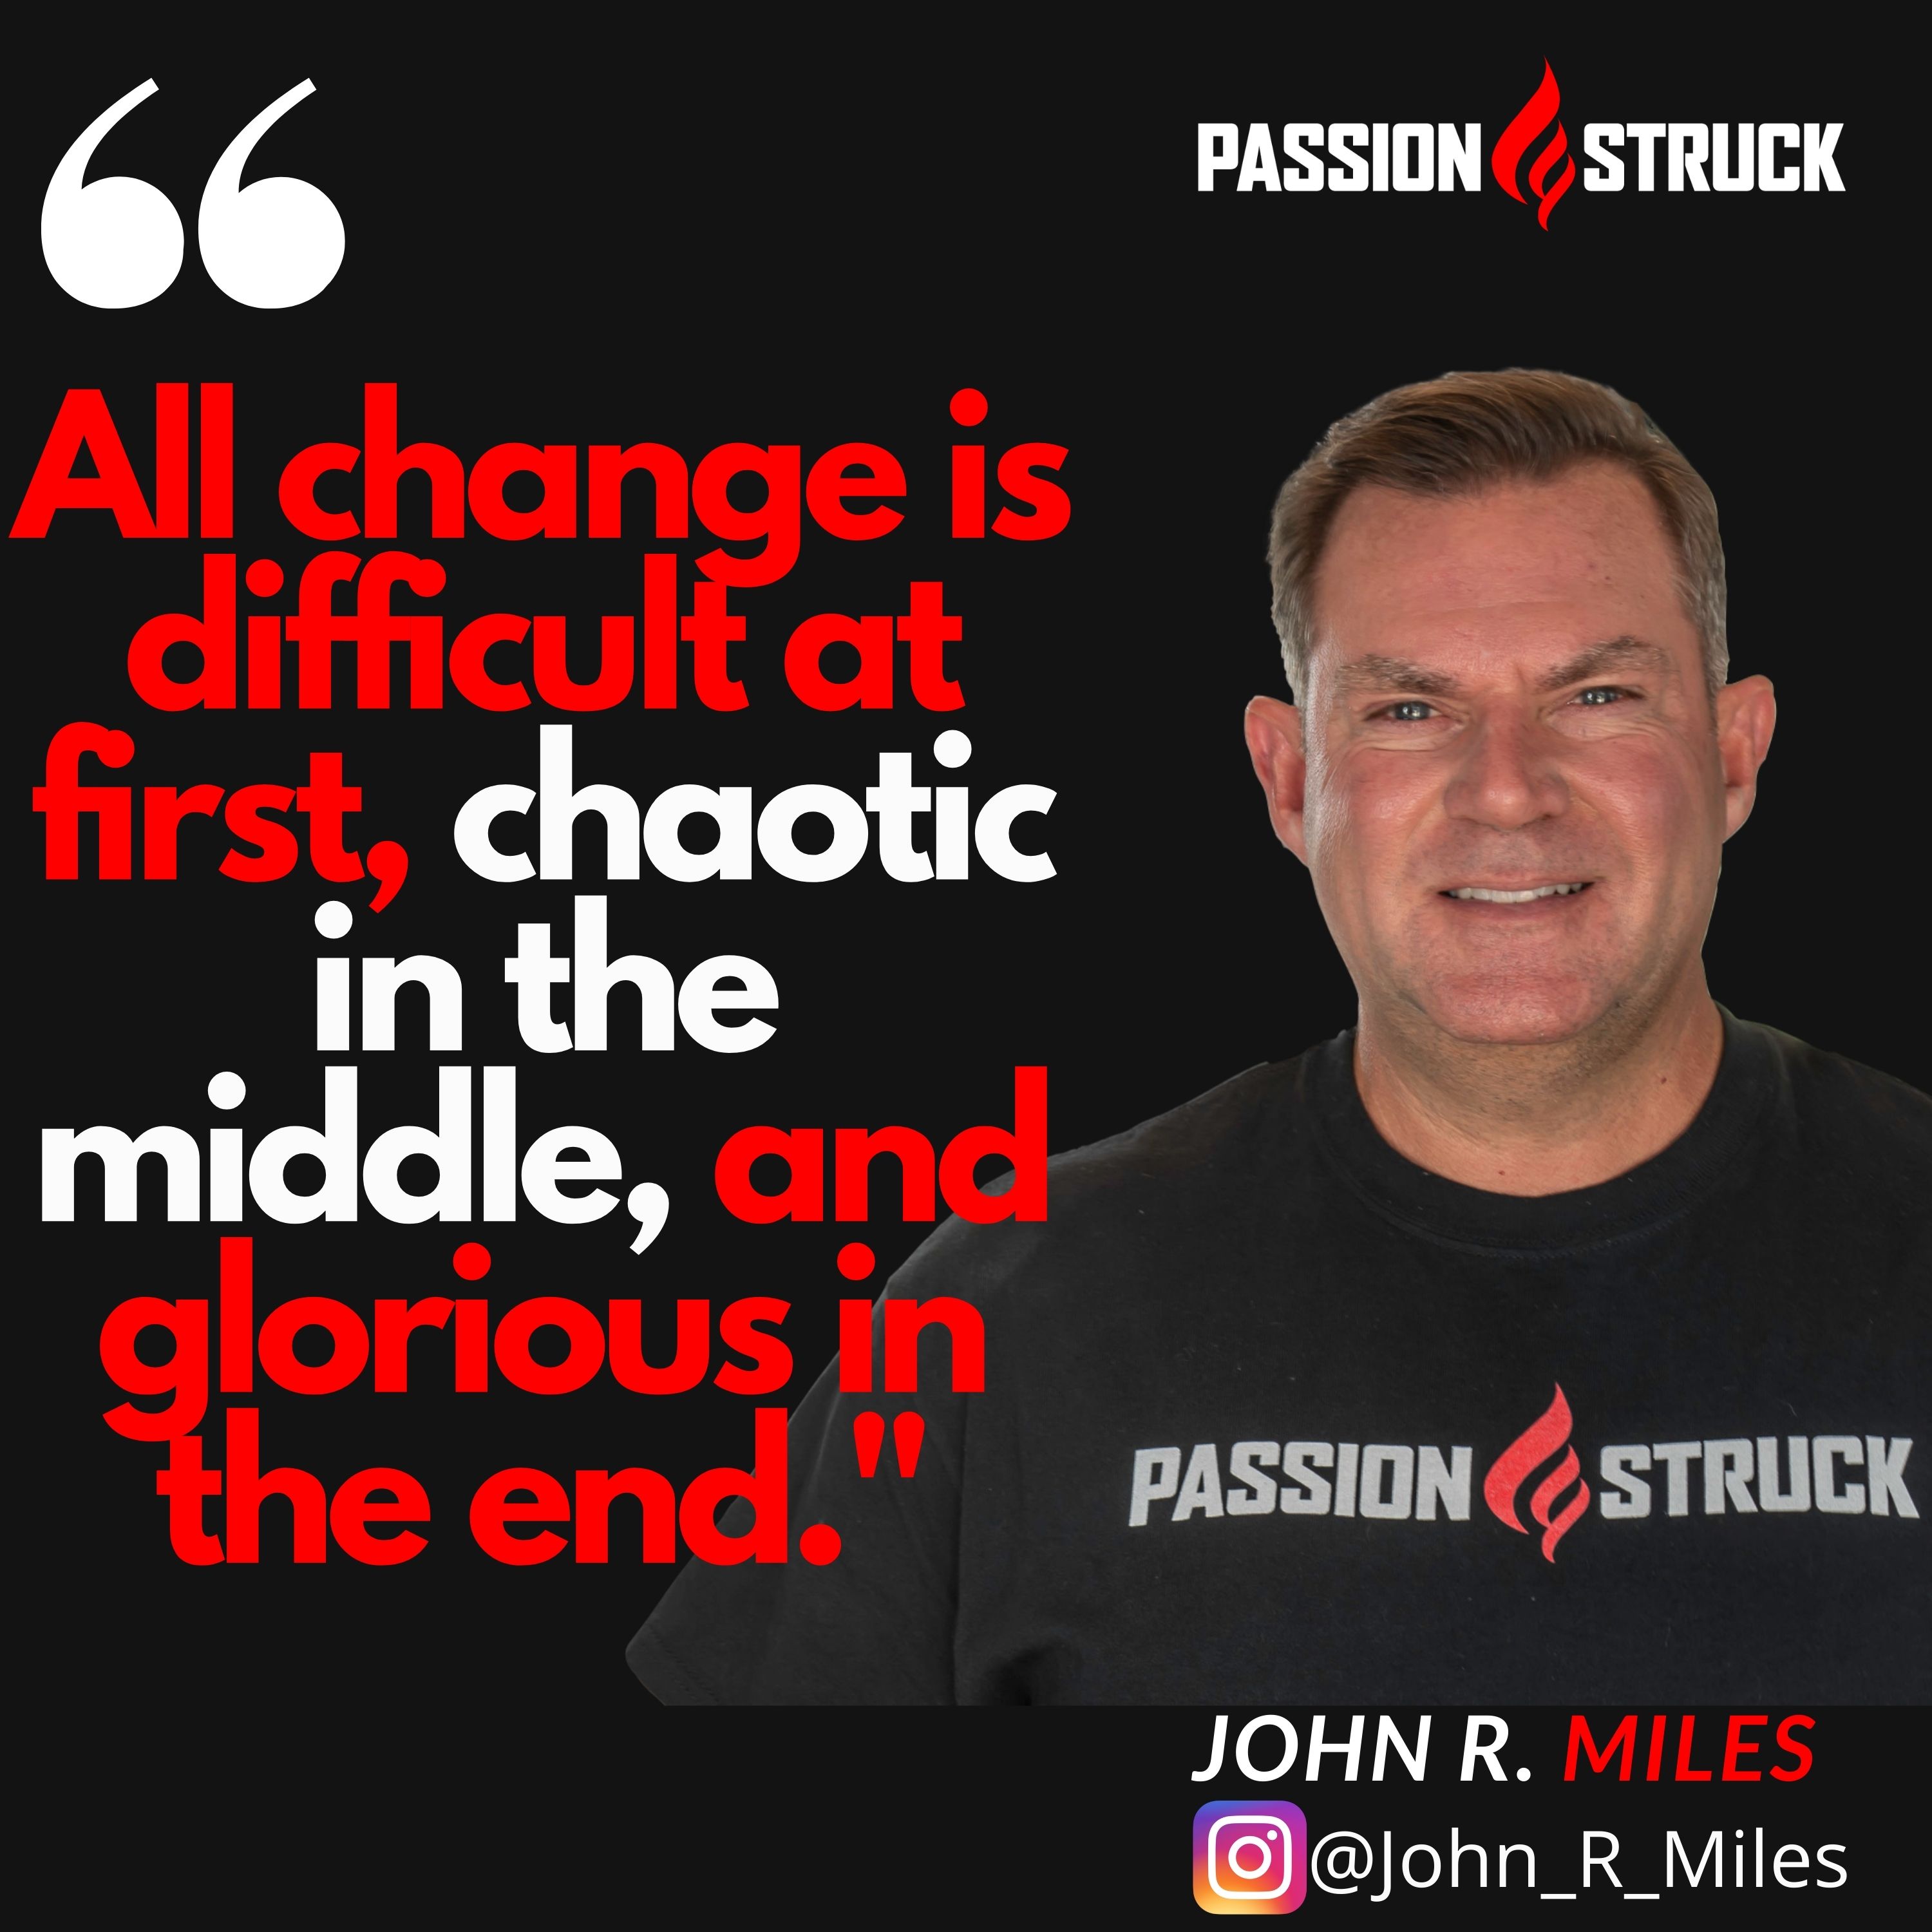 Quote by John R. Miles that all change is difficult at first, chaotic in the middle, and glorious in the end